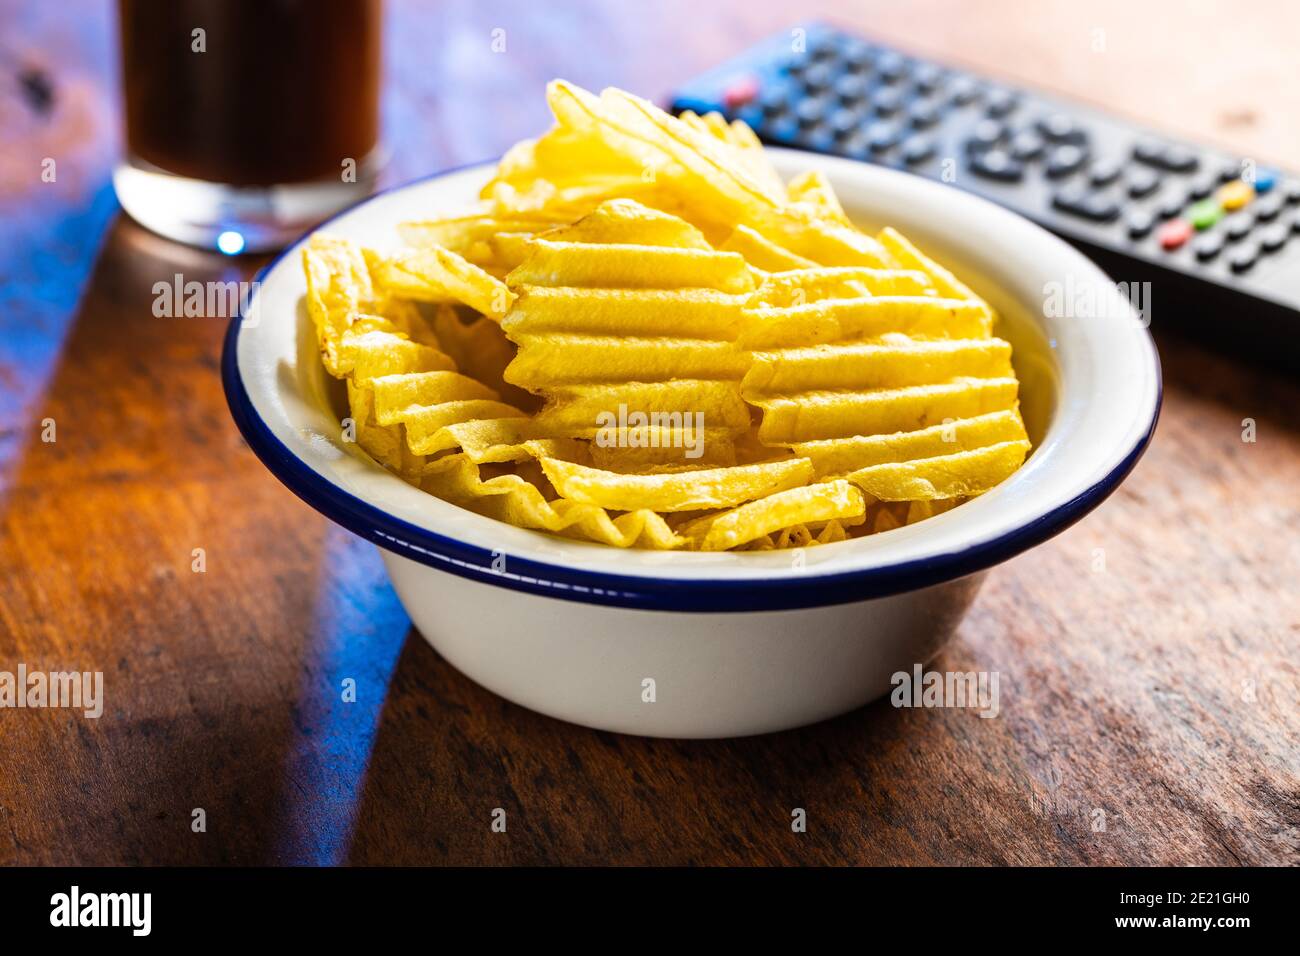 Crispy potato chips in bowl on wooden table Stock Photo